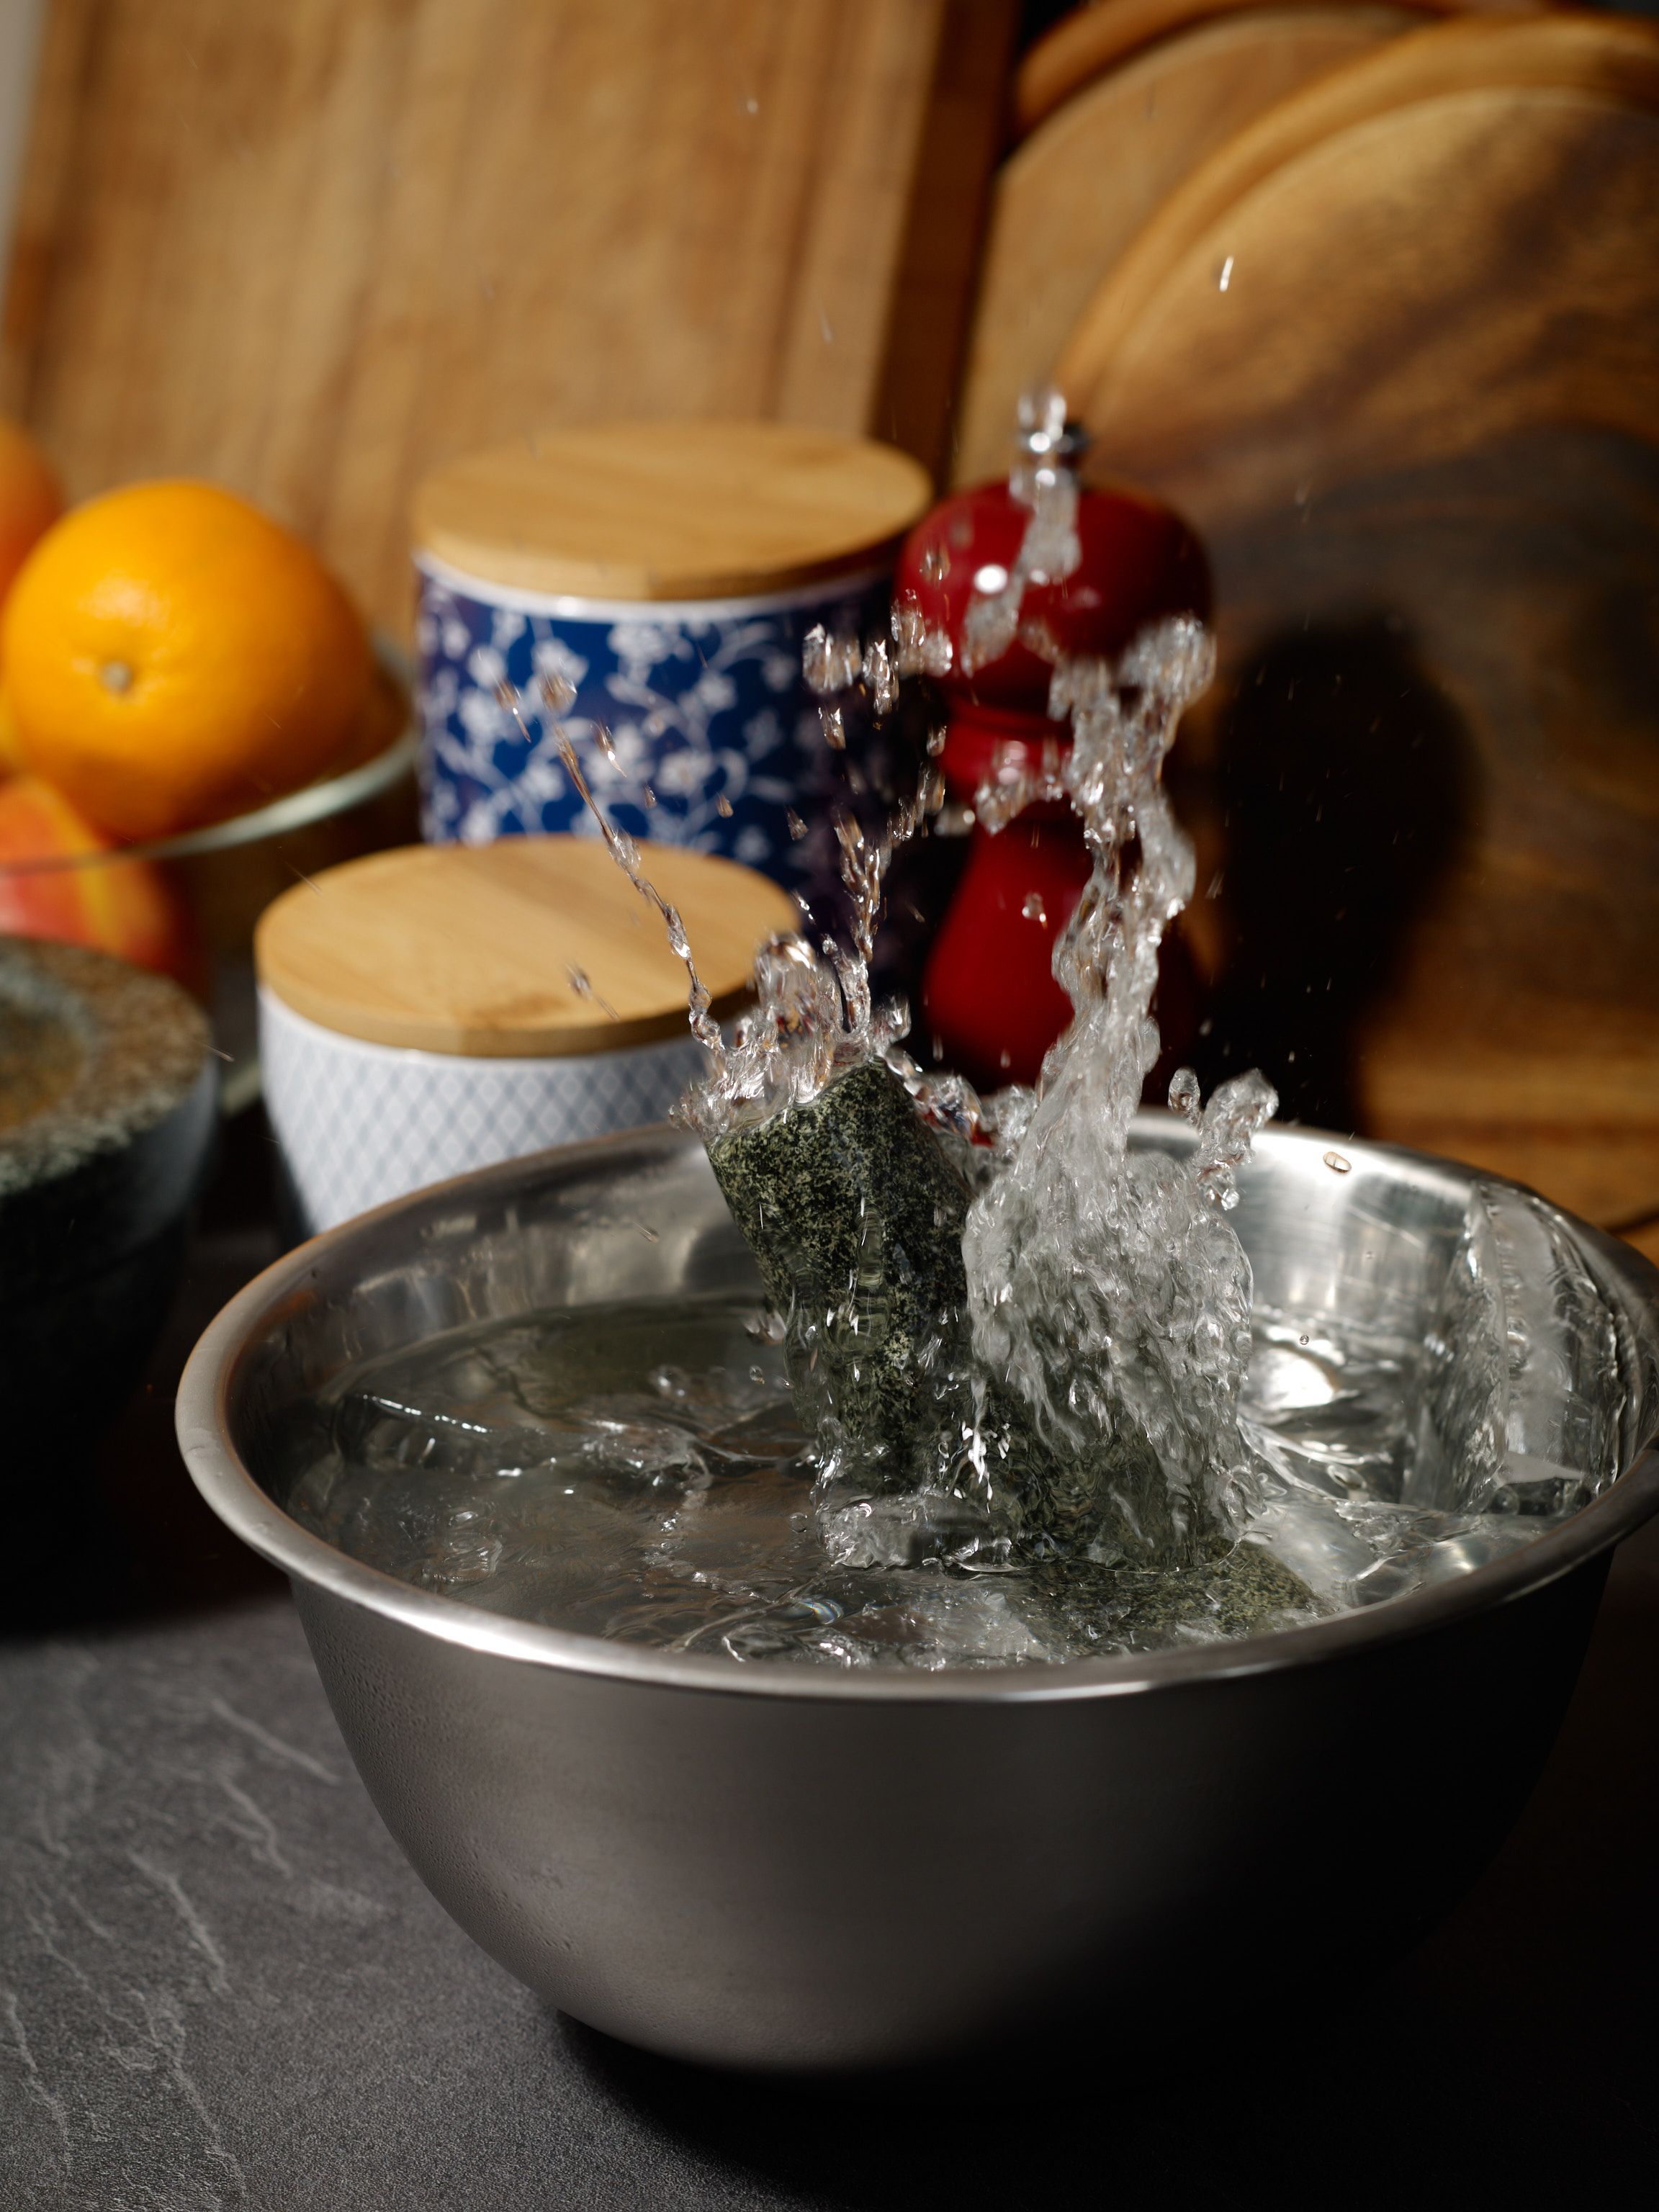 The crust on a bowl of ice water is being smashed by a granite pestle